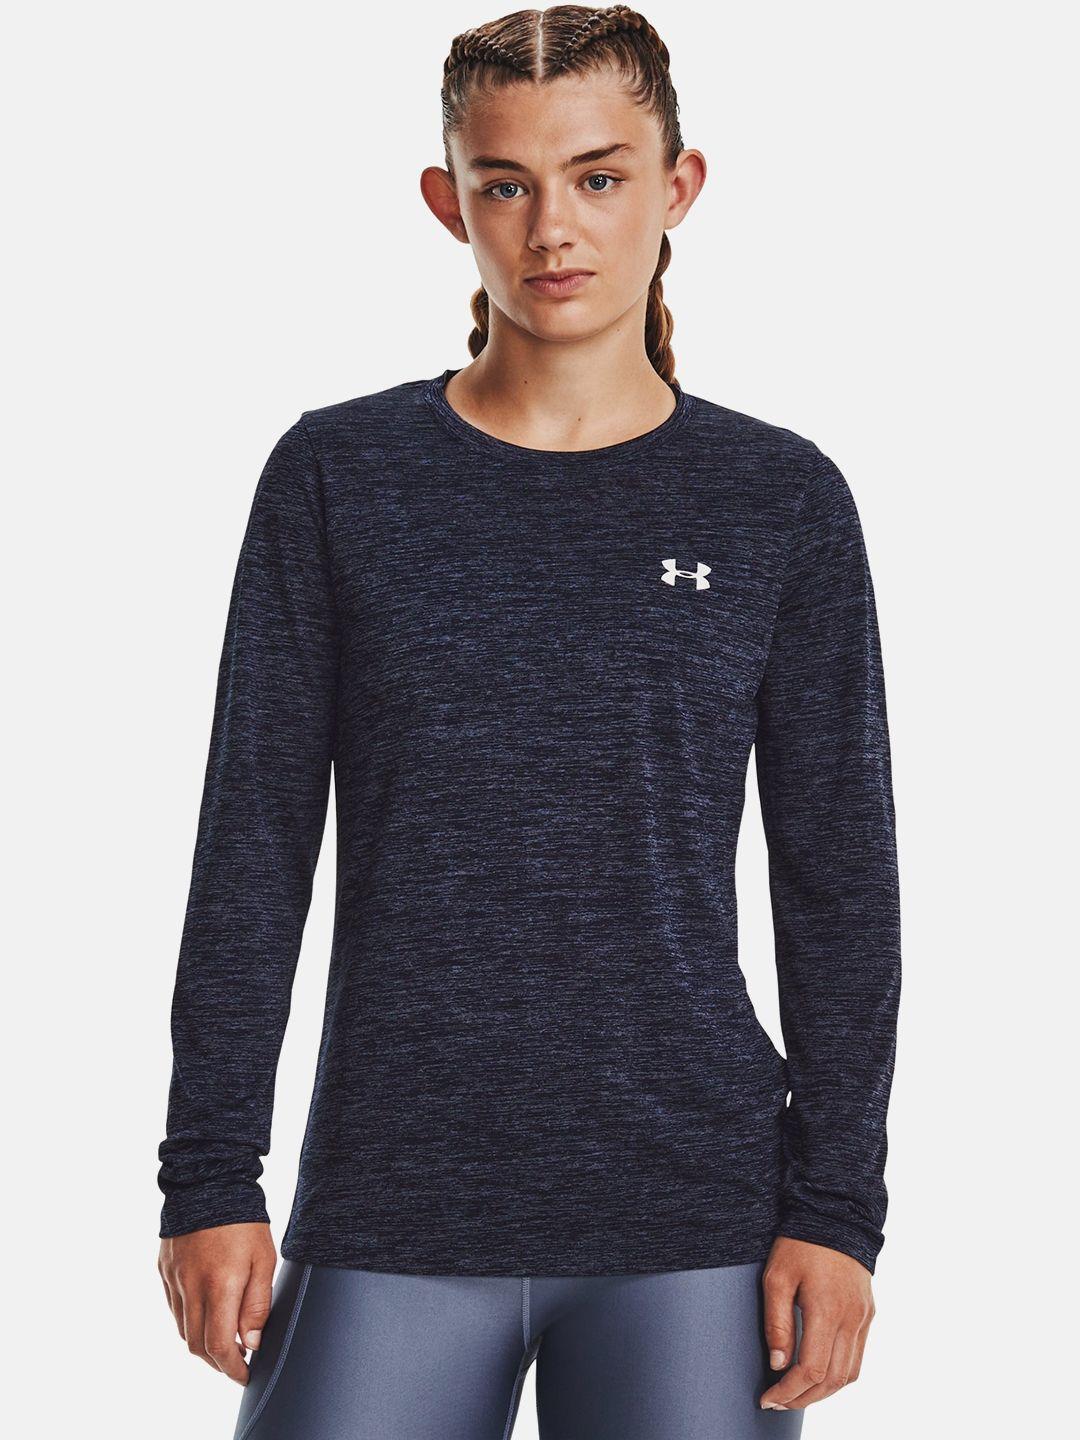 under-armour-self-designed-full-sleeves-quick-dry-ua-tech-training-t-shirt